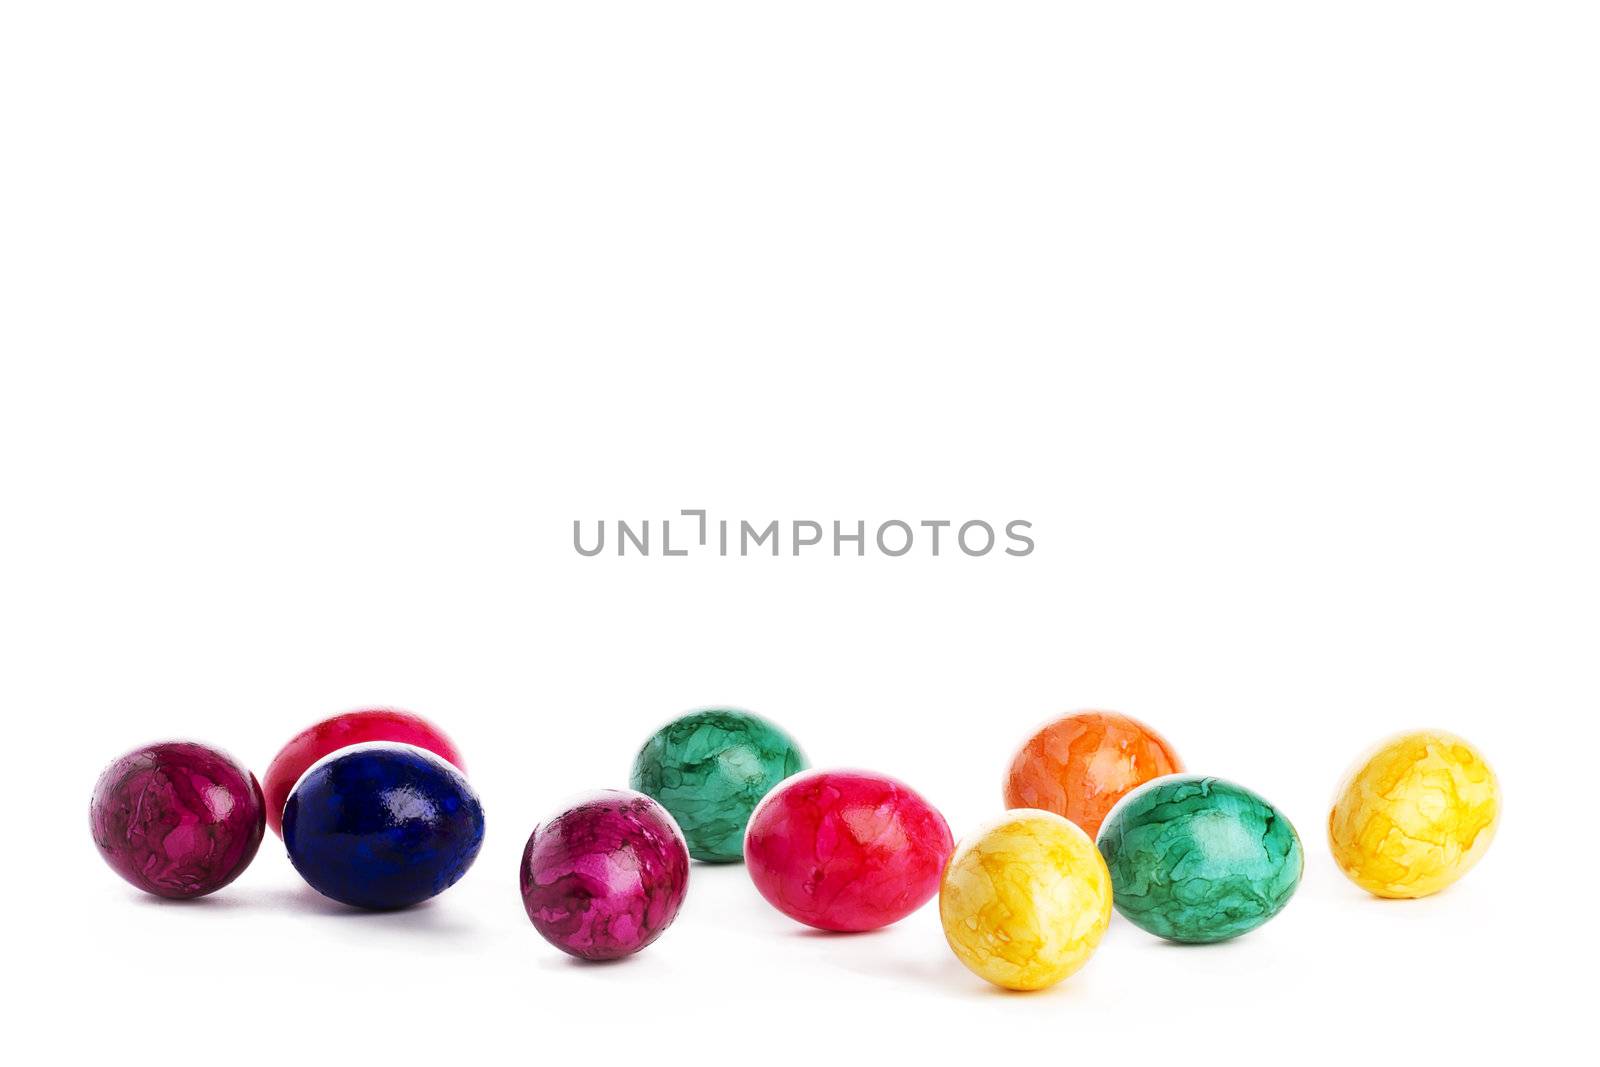 some colorful easter eggs on white background